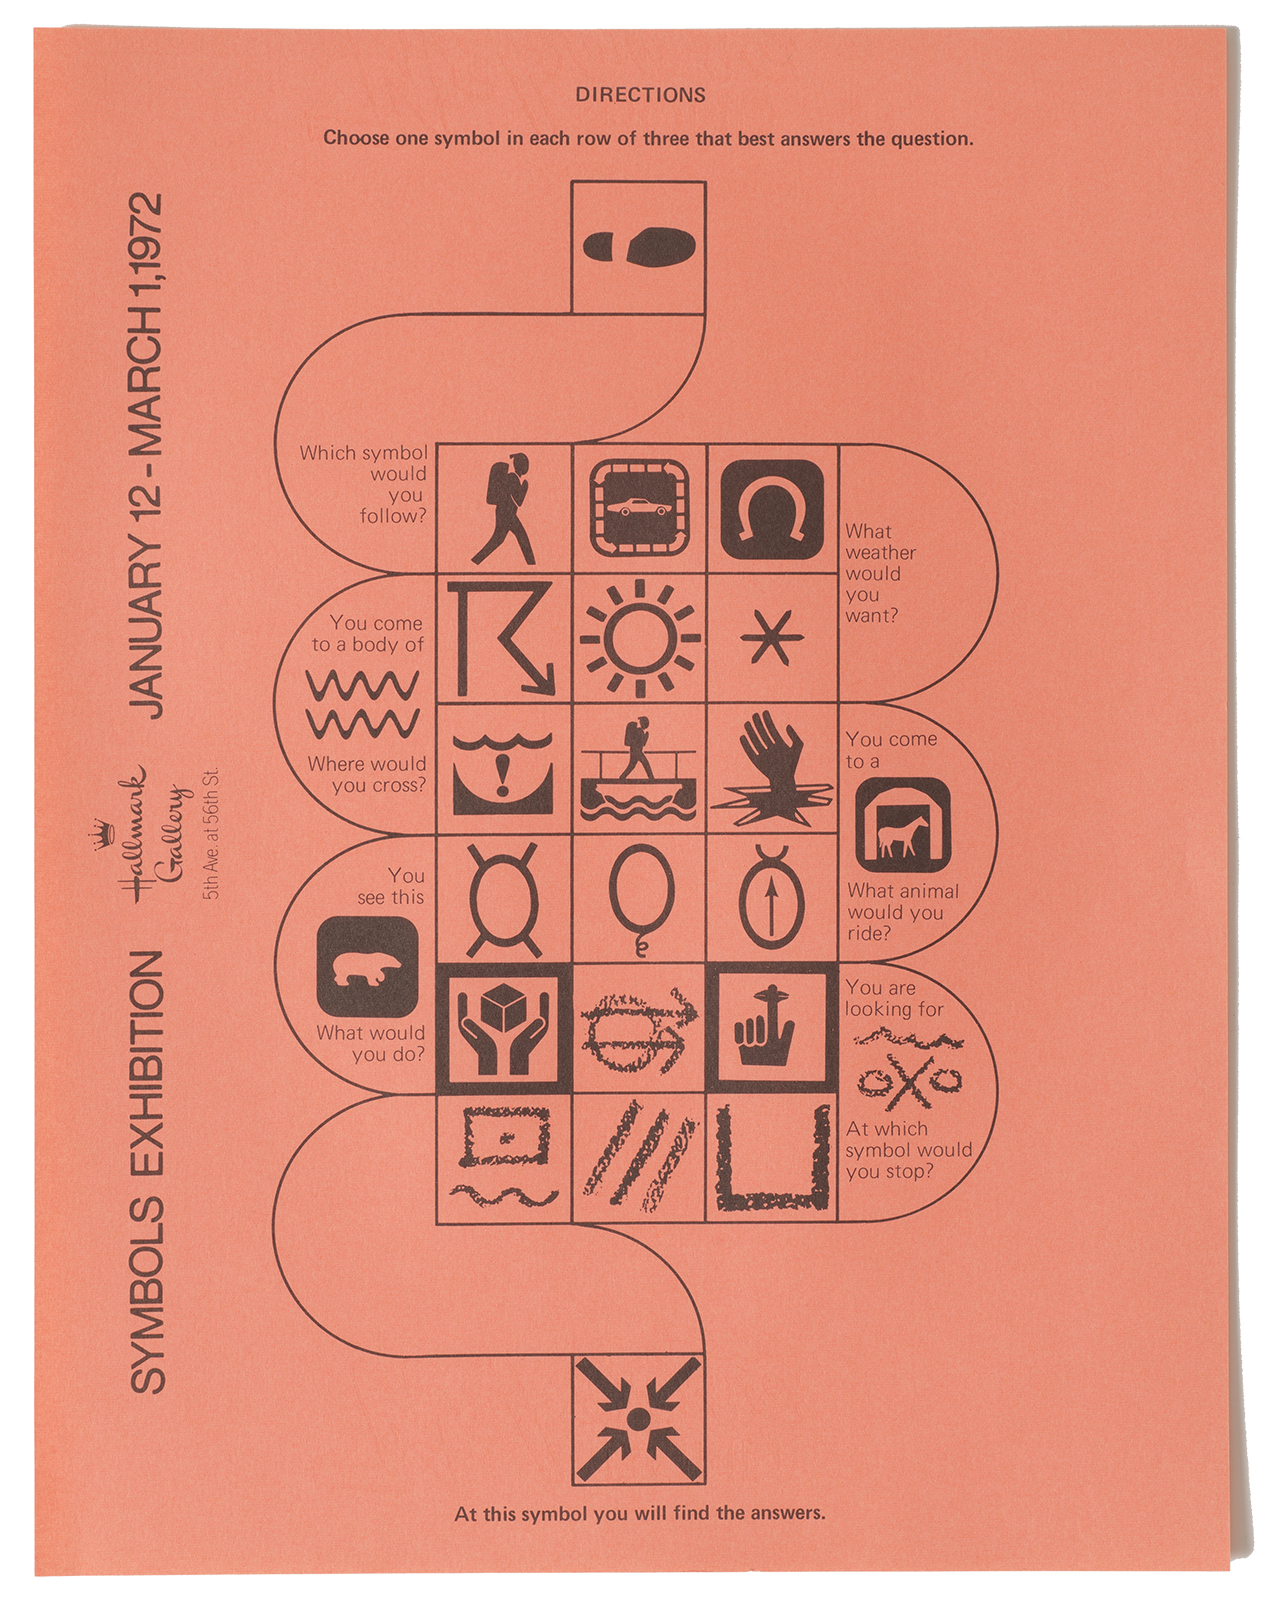 Coral pink paper with black text and 2D images depicting a series of symbols within a winding path. The top of the page states, “Directions” above “Choose one symbol in each row of three that best answers the question.” The bottom of the page says, “At this symbol you will find the answers.” The left side of the page reads “Symbols Exhibition January 12 - March 1, 1972.”